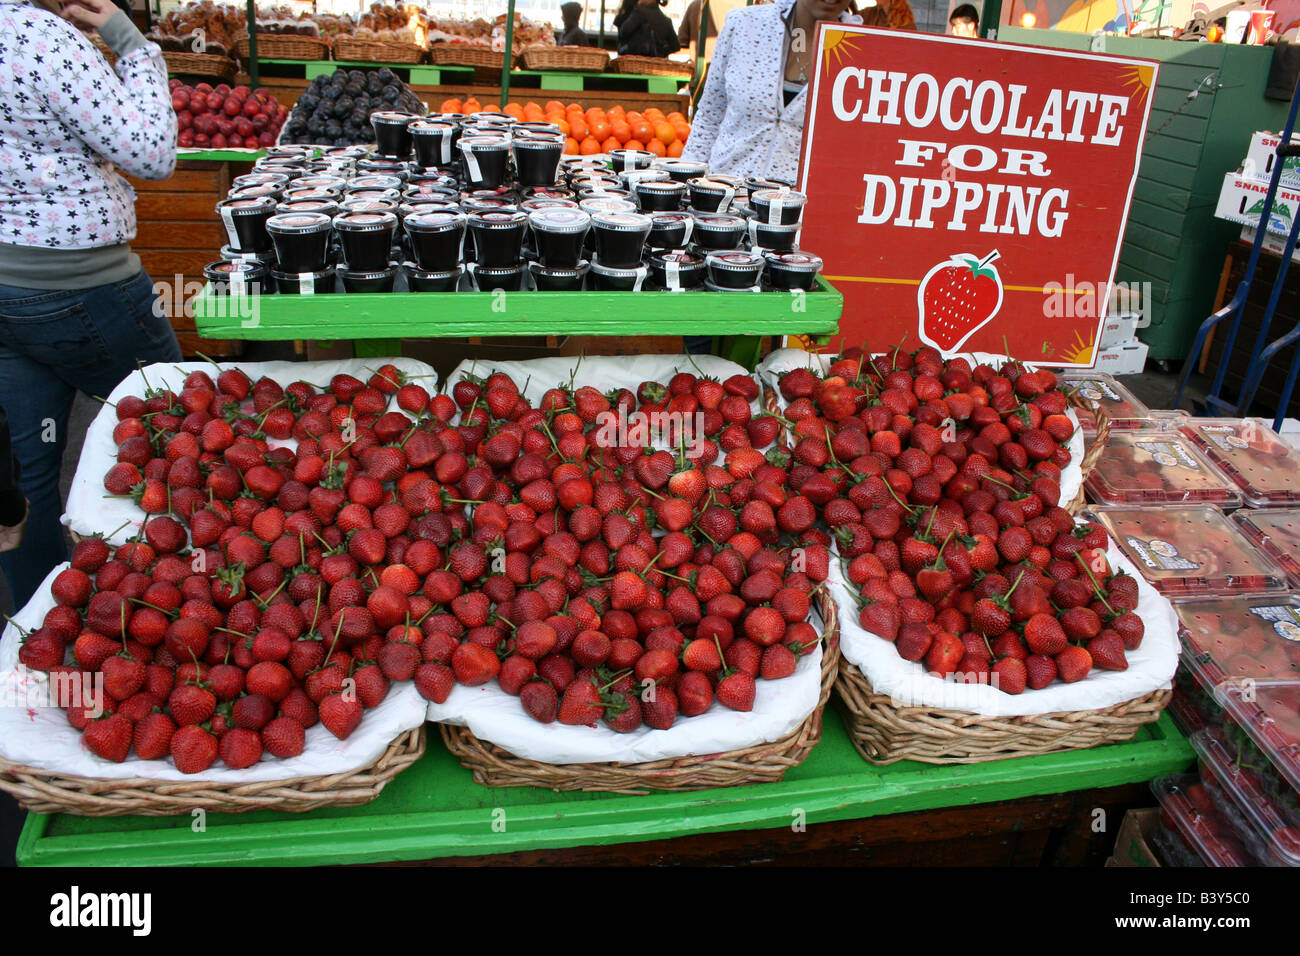 outdoor stand selling fresh large california strawberries strawberry with optional chocolate sauce for dipping Stock Photo